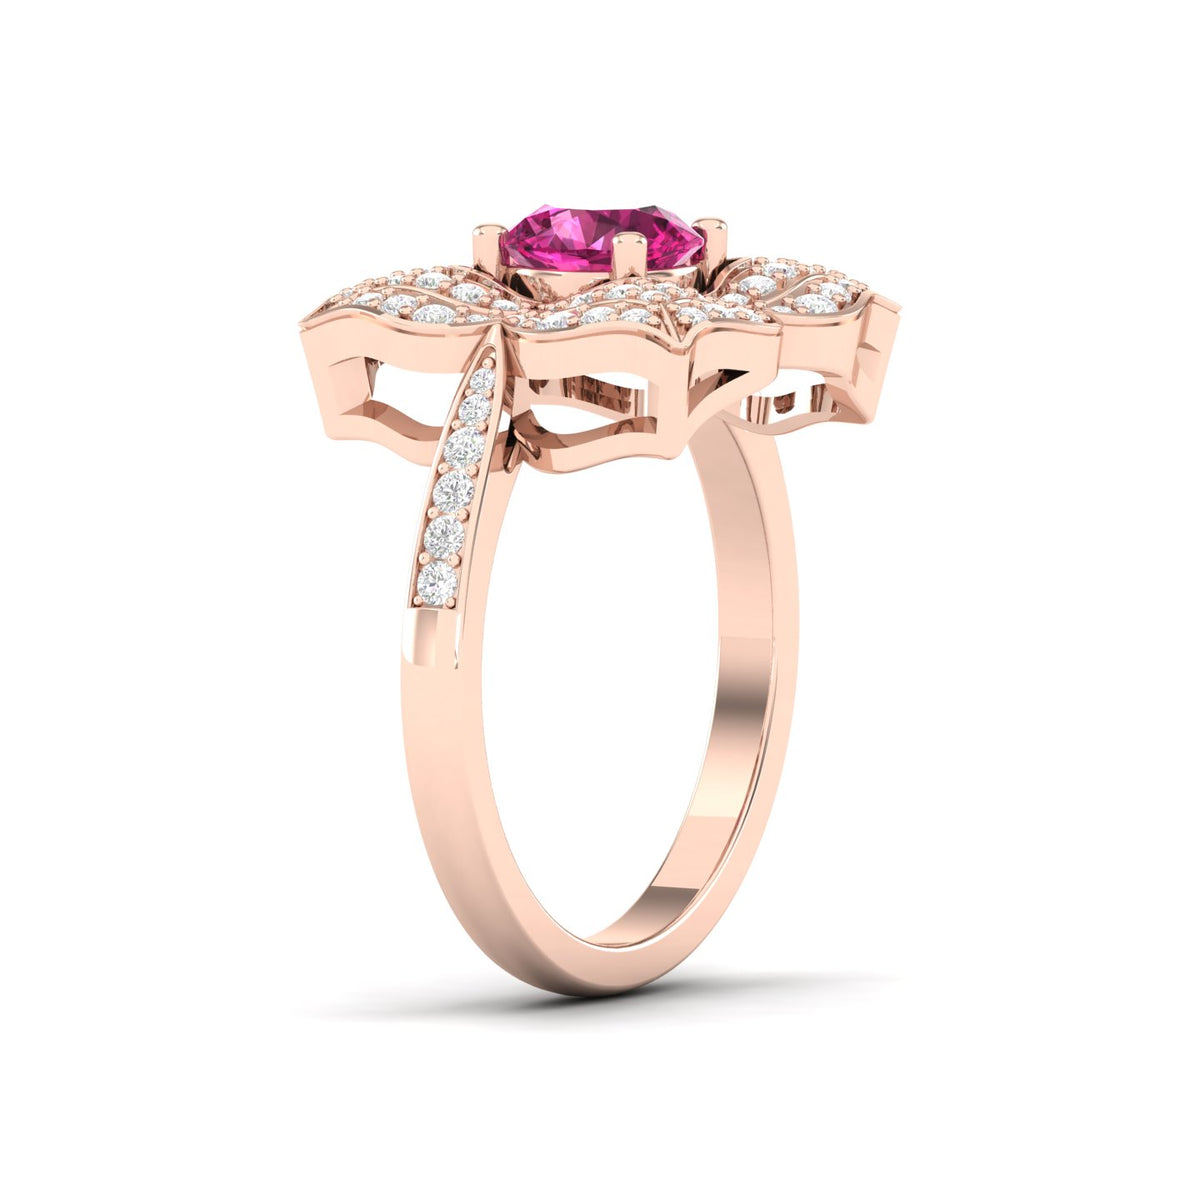 Maurya Solitaire Pink Amethyst Pompon Ring with Accent Diamonds